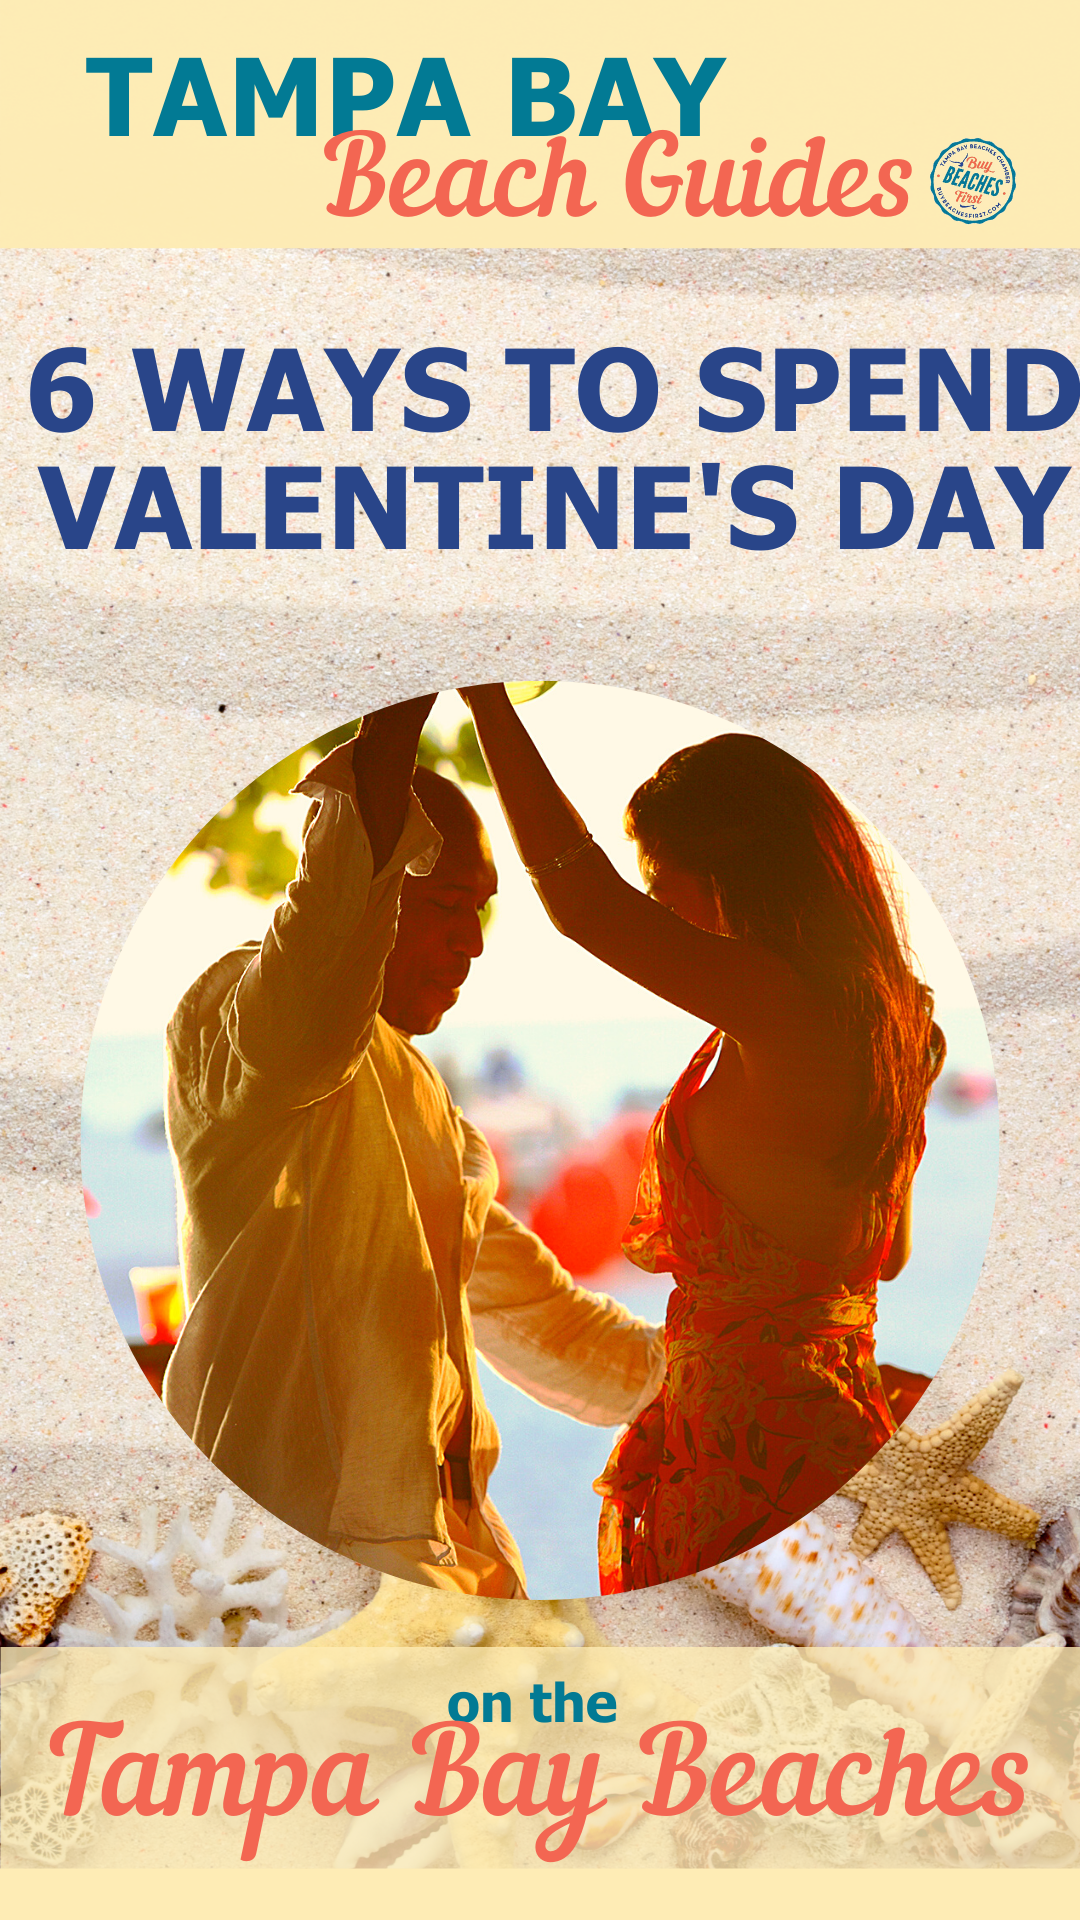 6 Ways to Spend your Valentine’s Day on the Tampa Bay Beaches